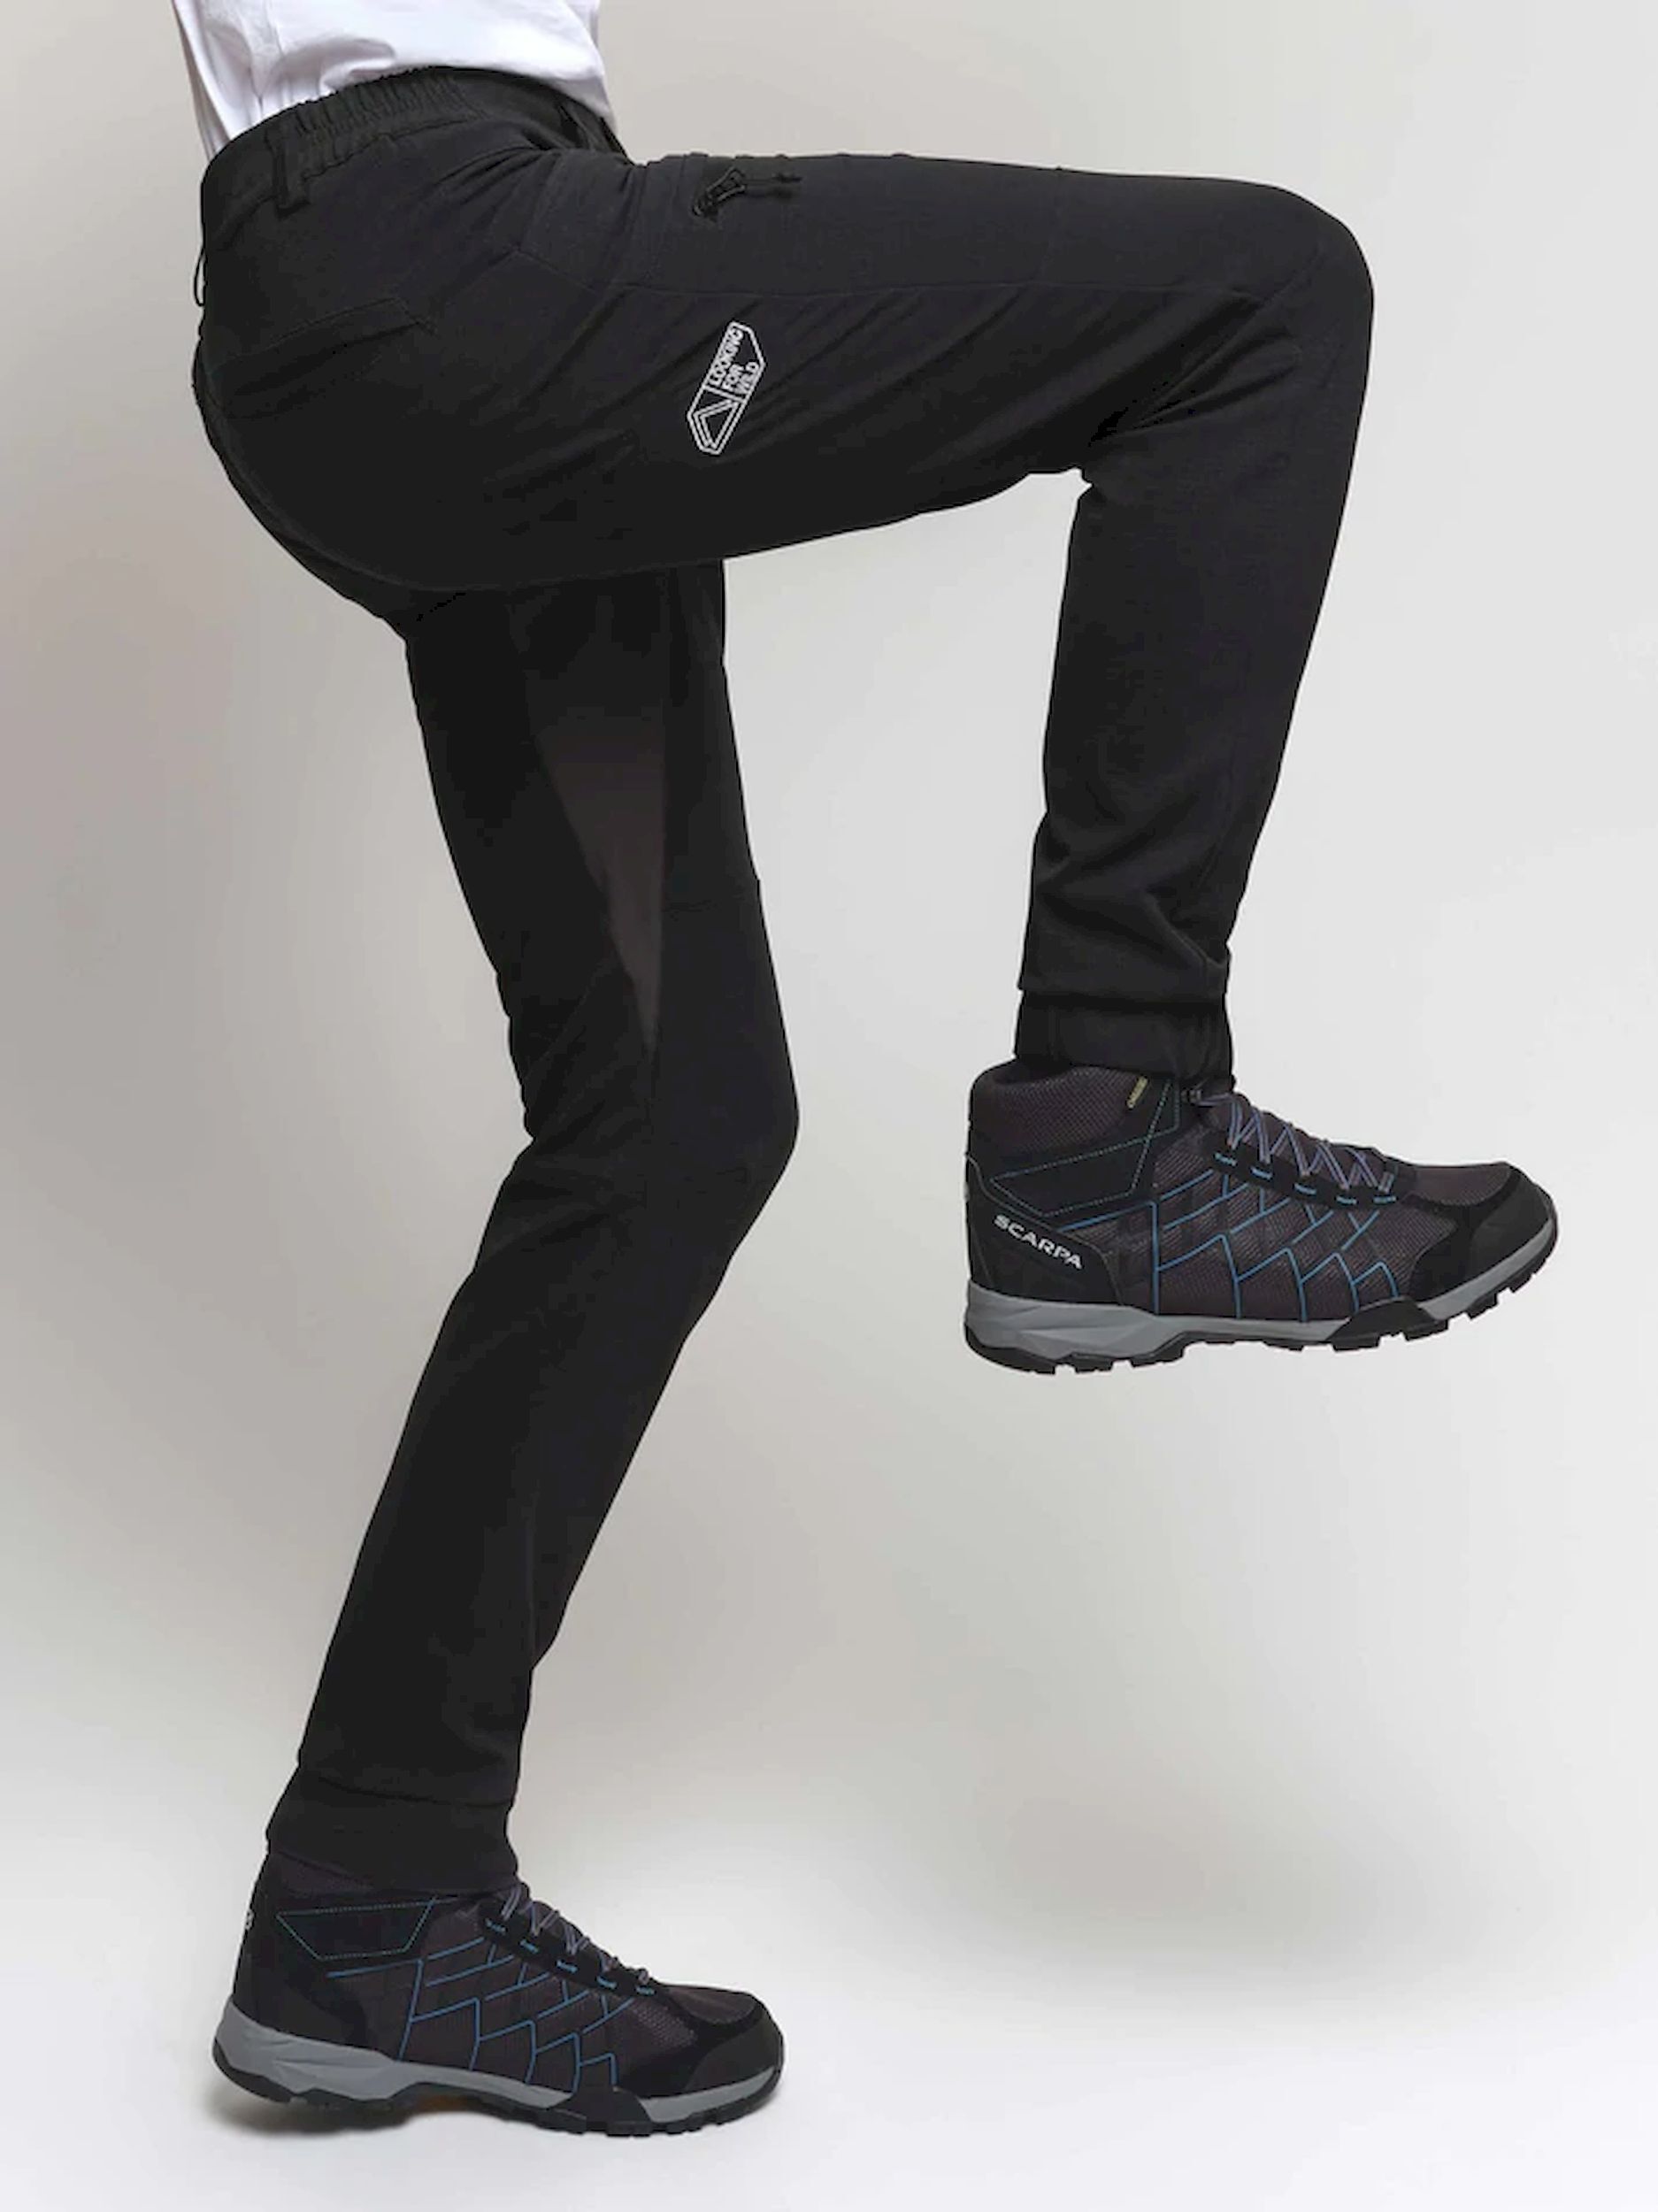 Looking For Wild F-208 - Climbing trousers - Men's